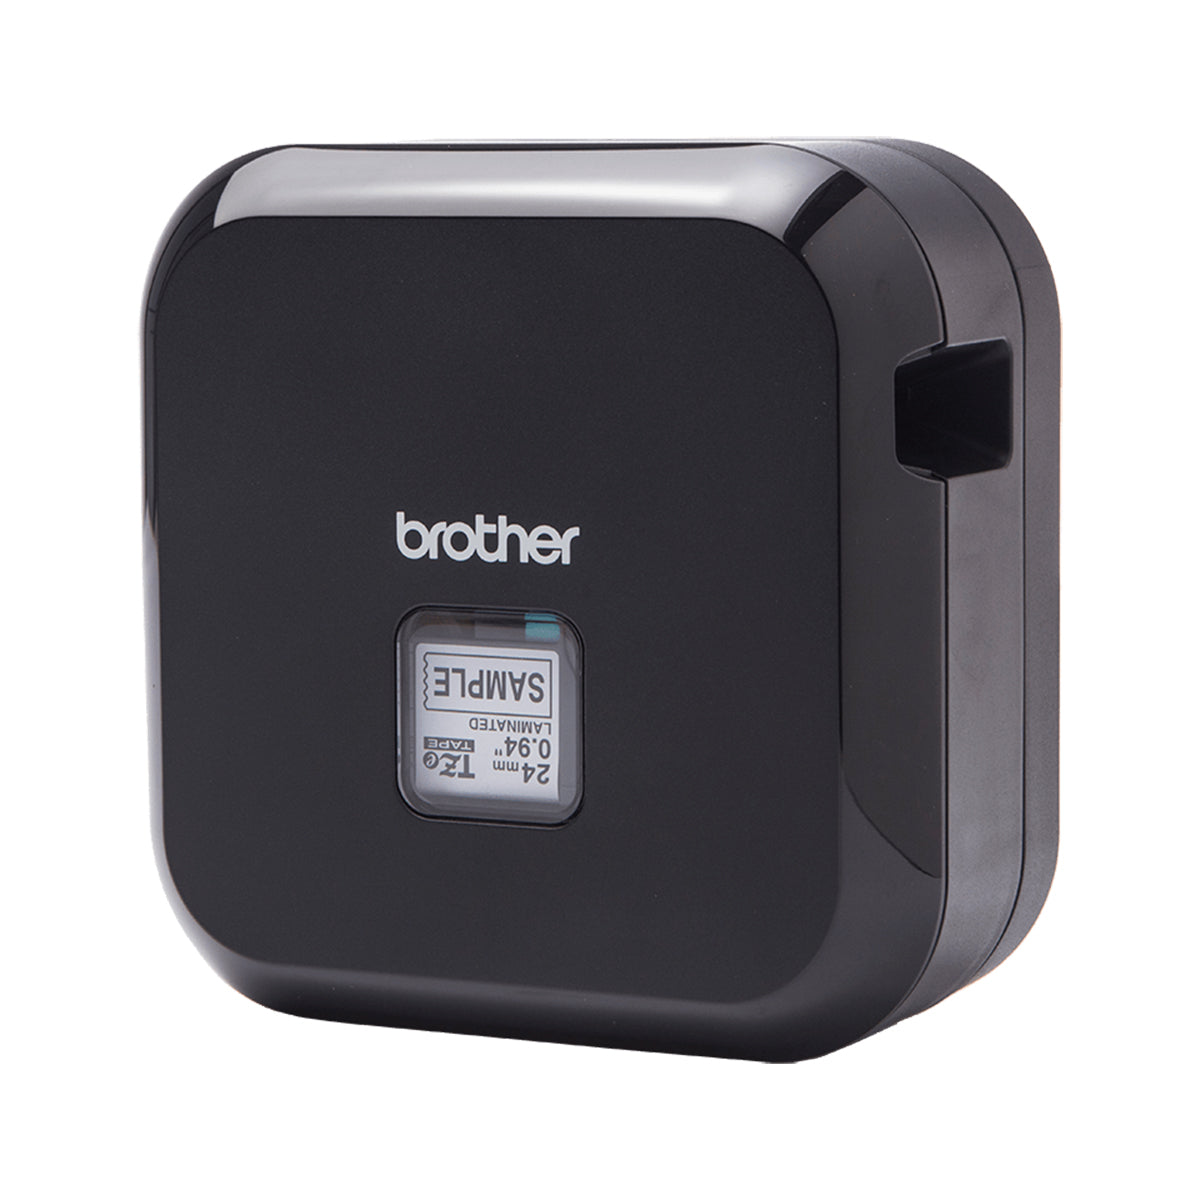 Etikettskriver Brother P-touch Cube Plus